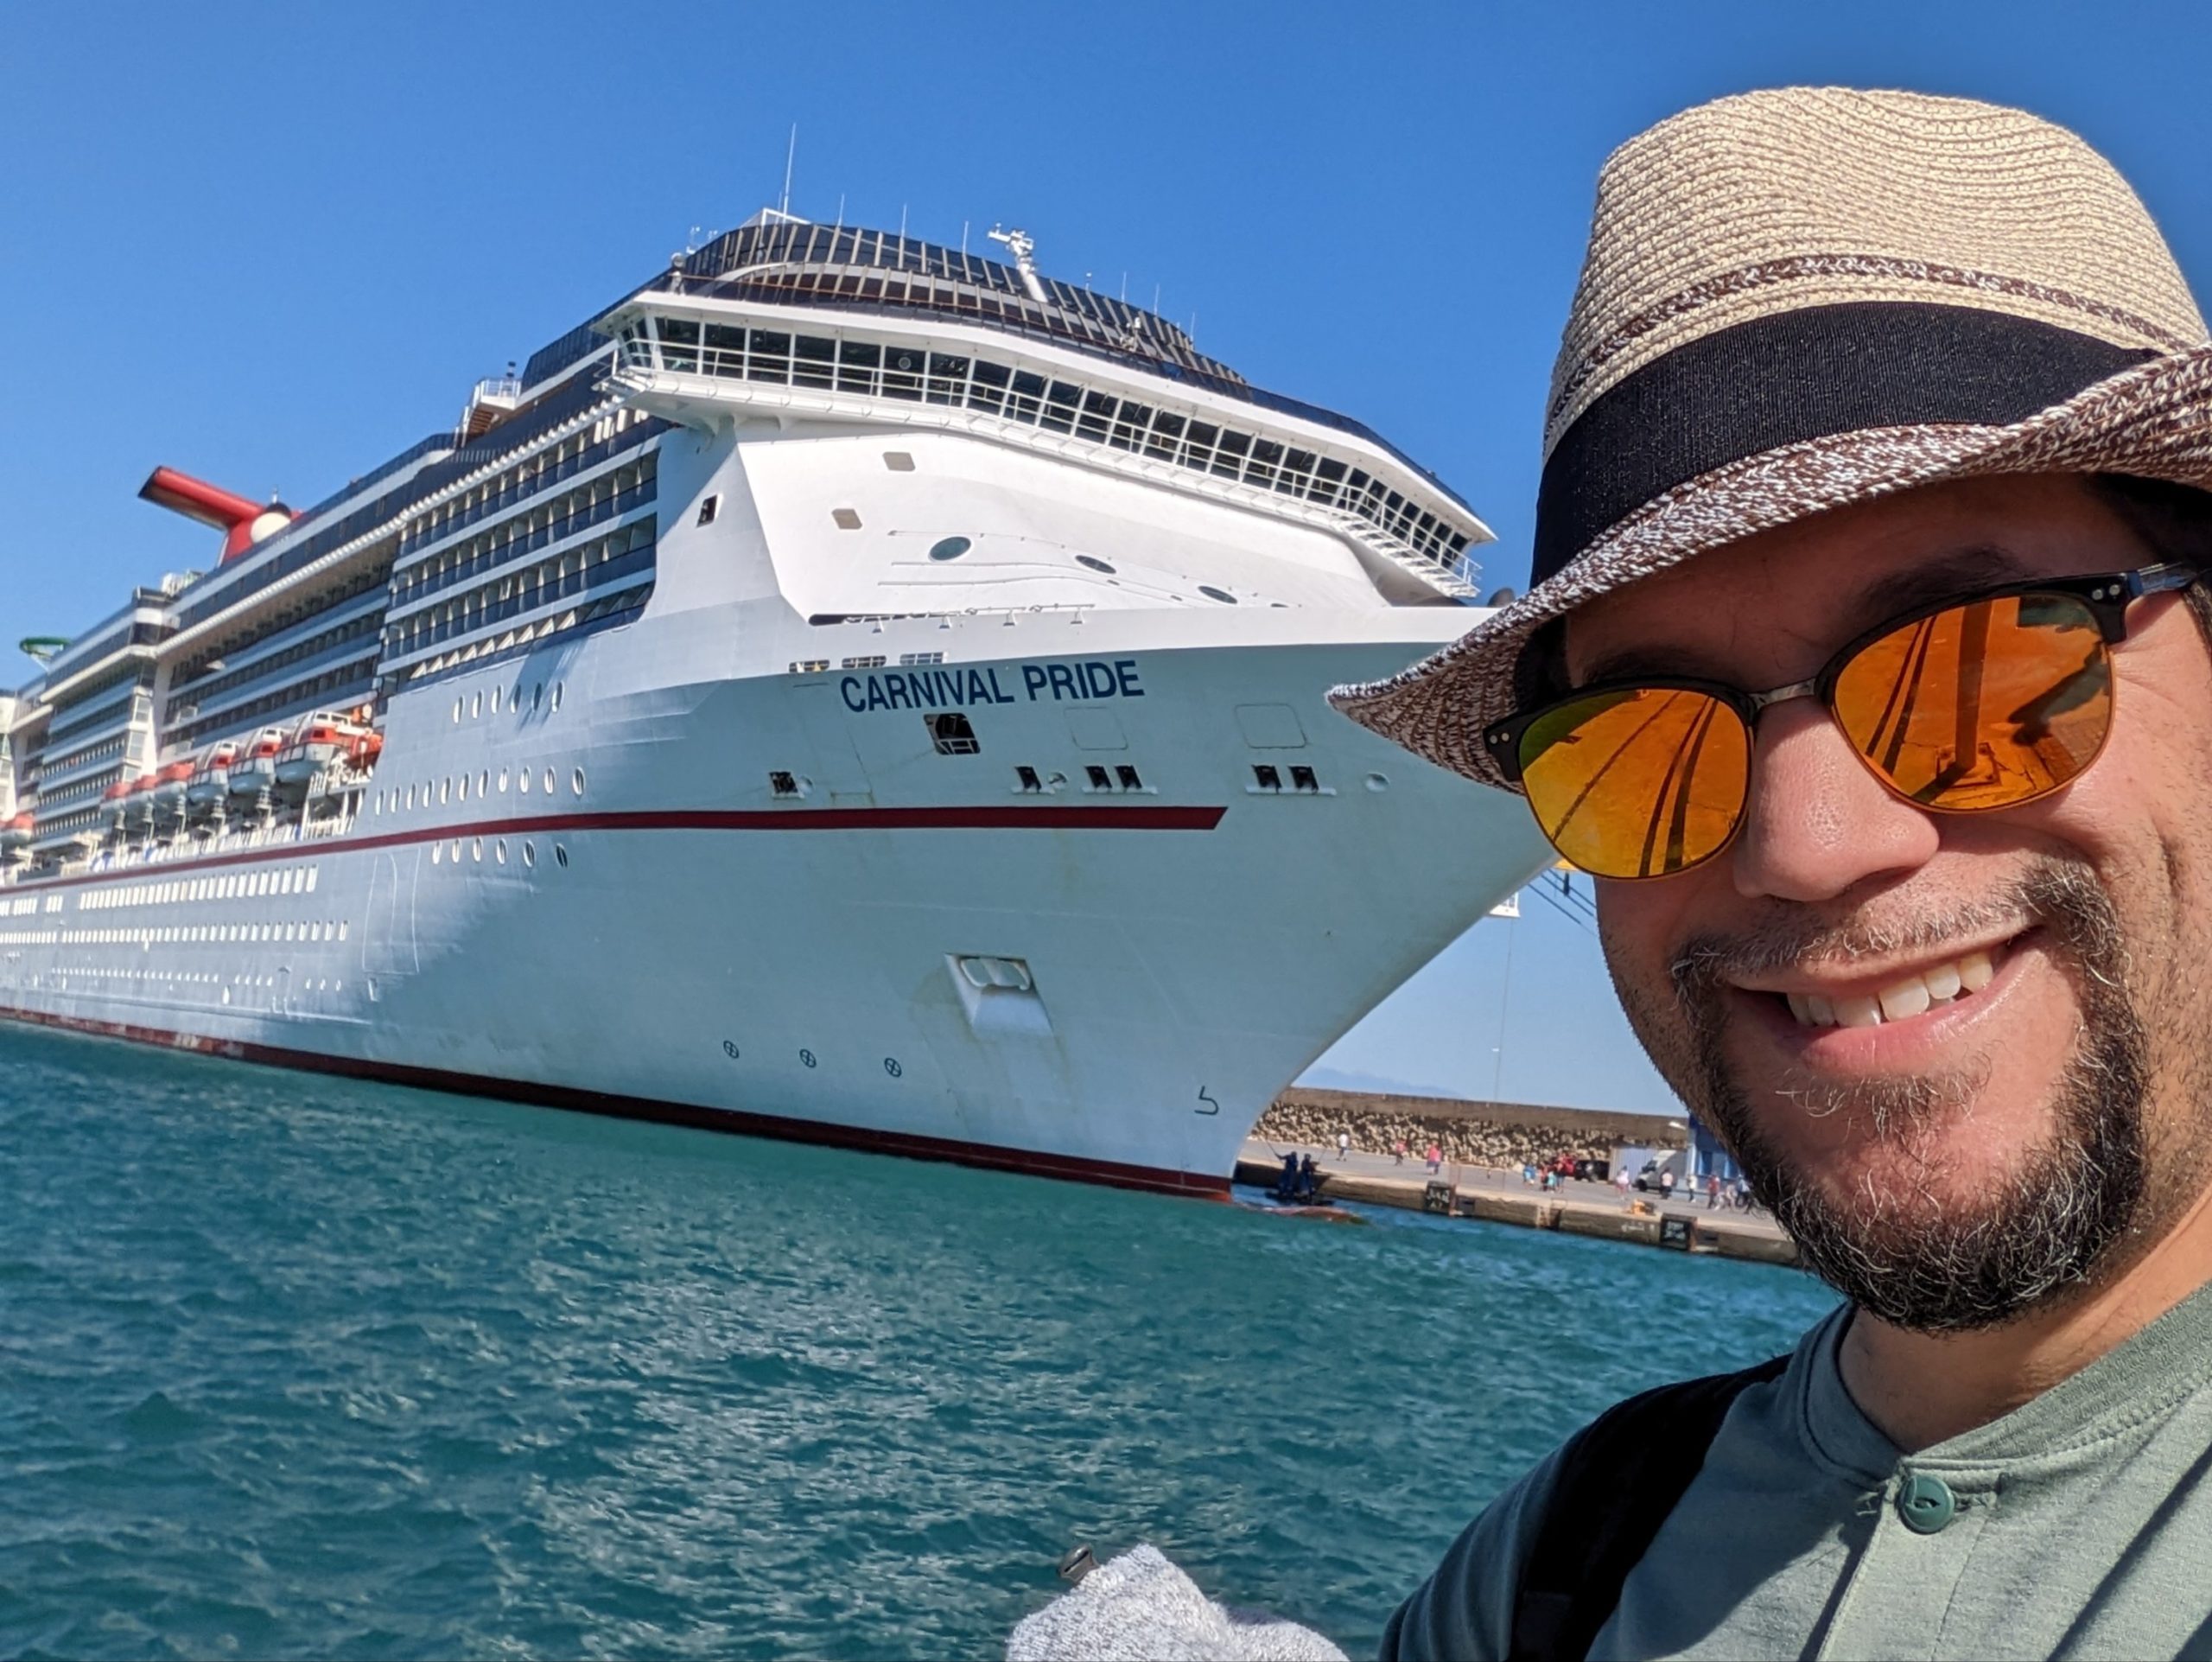 a man taking a selfie in front of a cruise ship